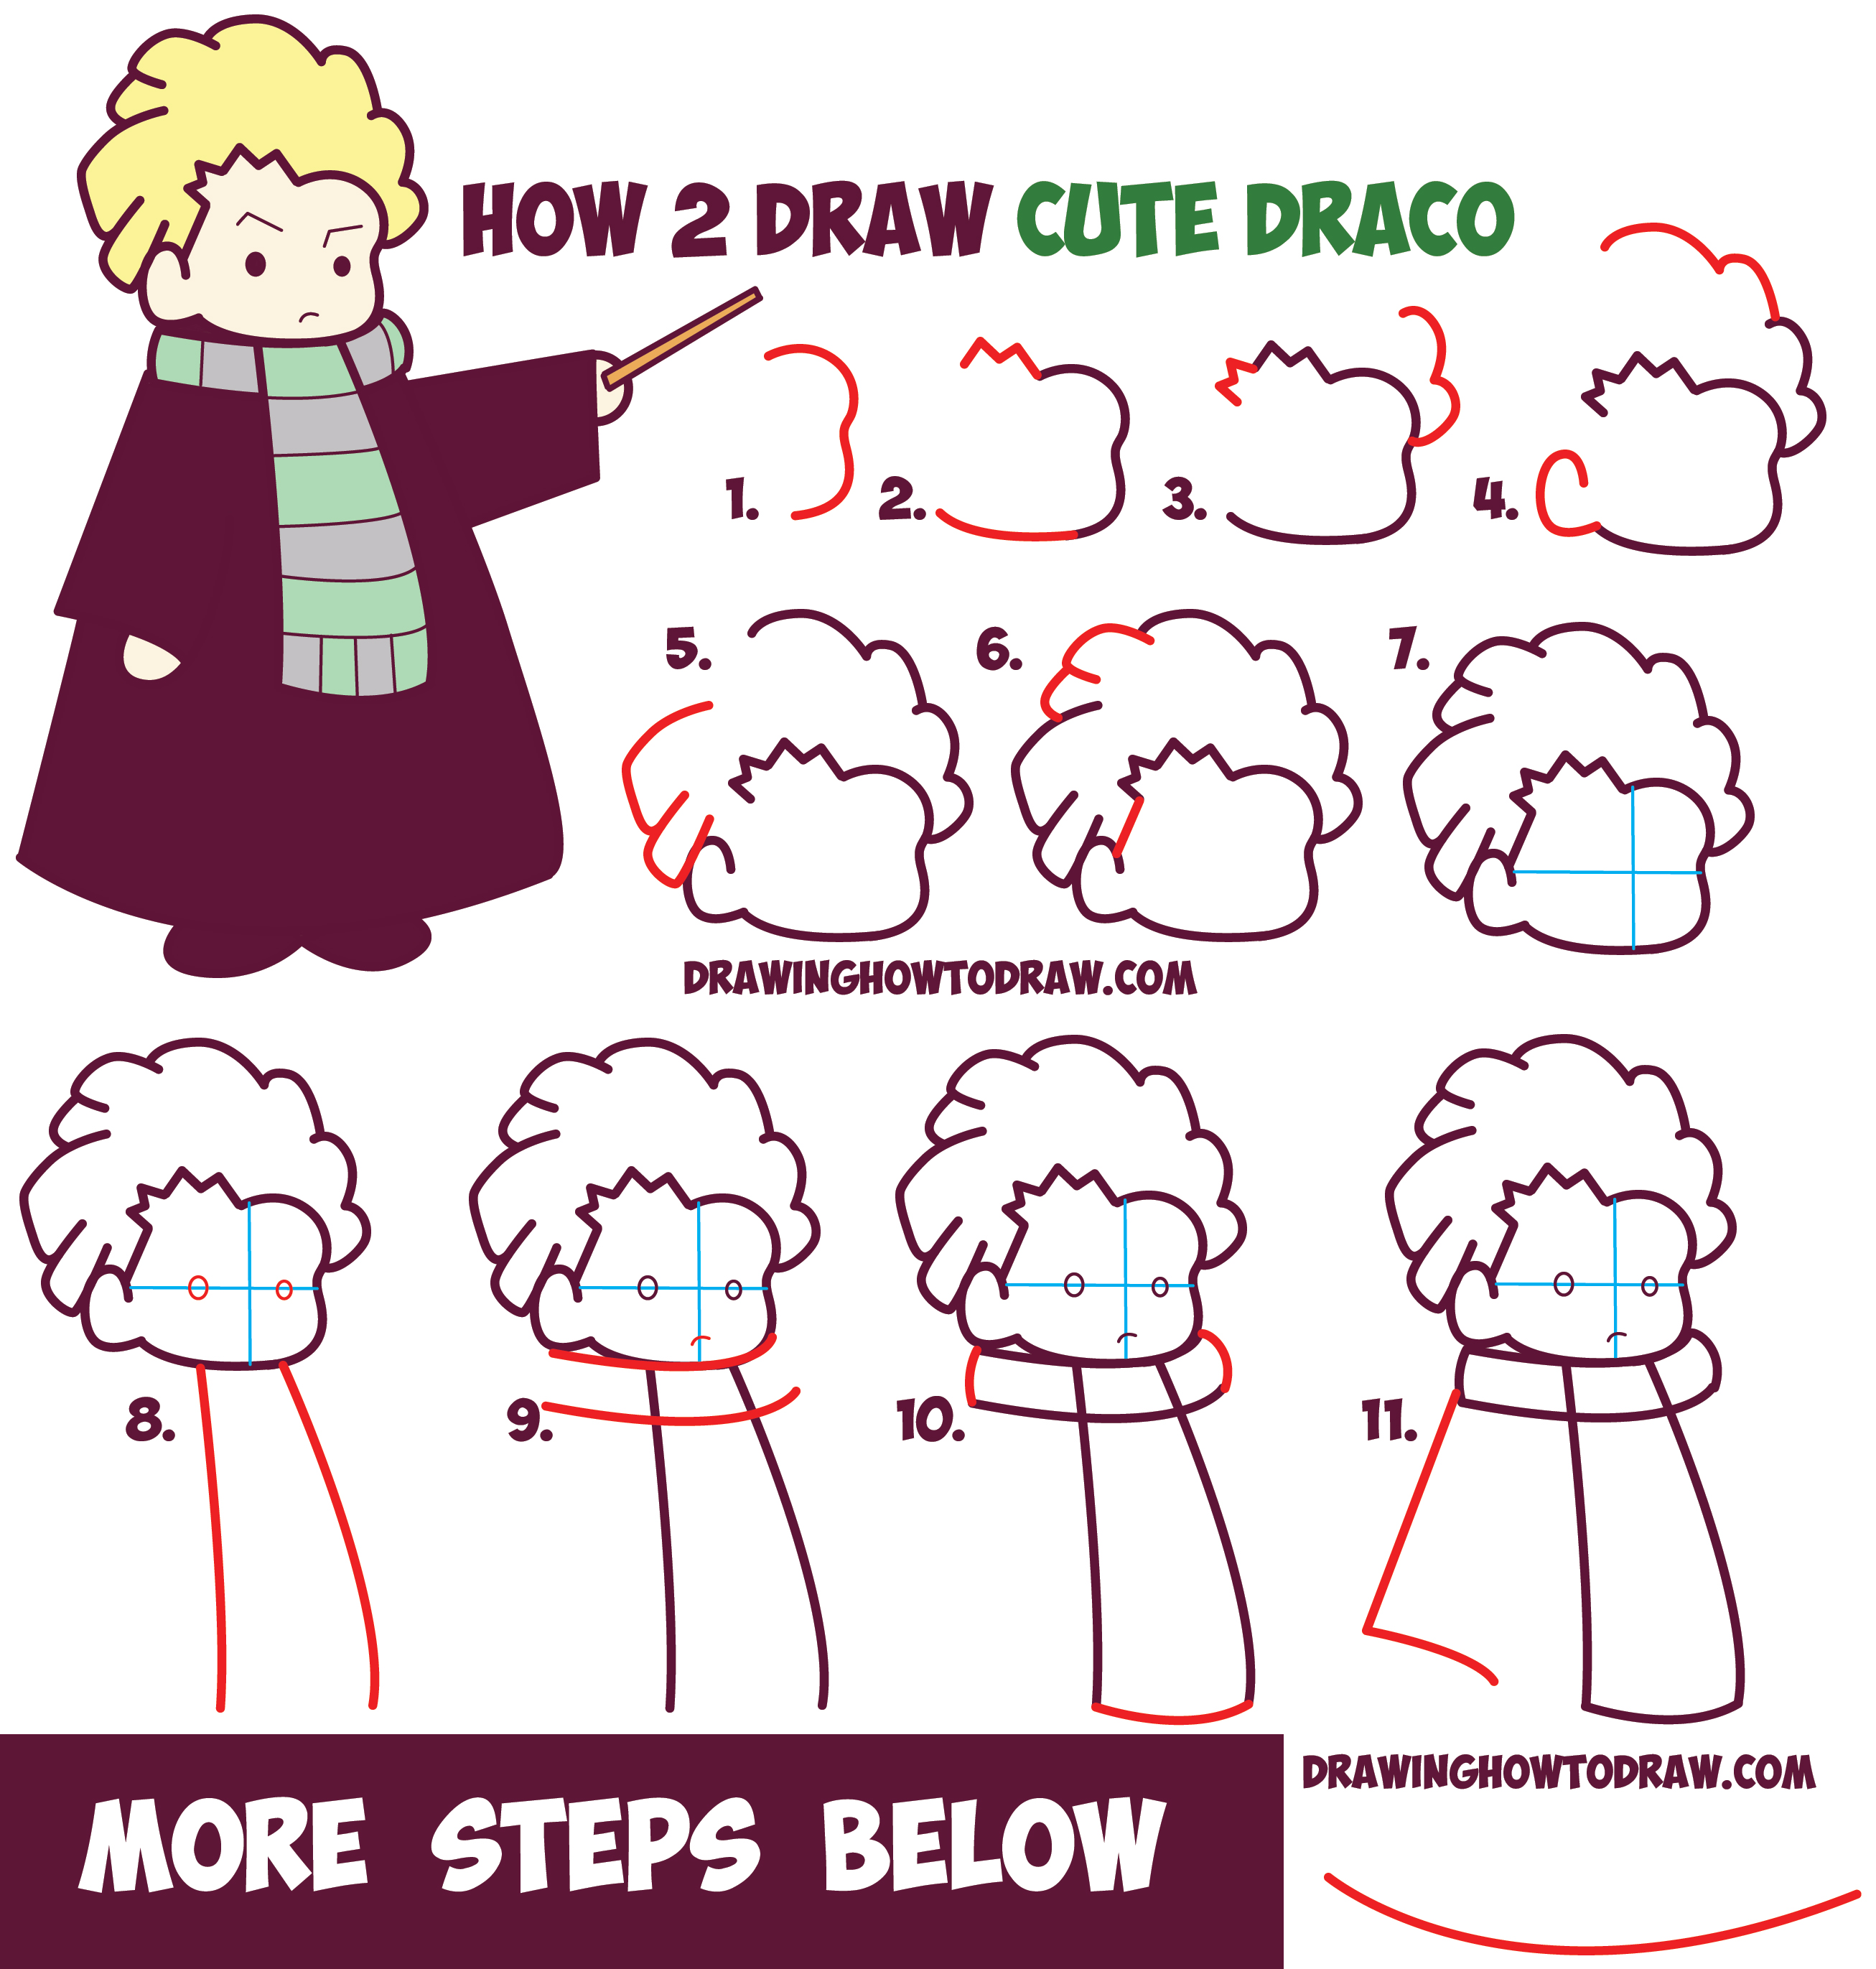 How to Draw Cute Draco Malfoy from Harry Potter (Chibi / Kawaii) Easy Step by Step Drawing Tutorial